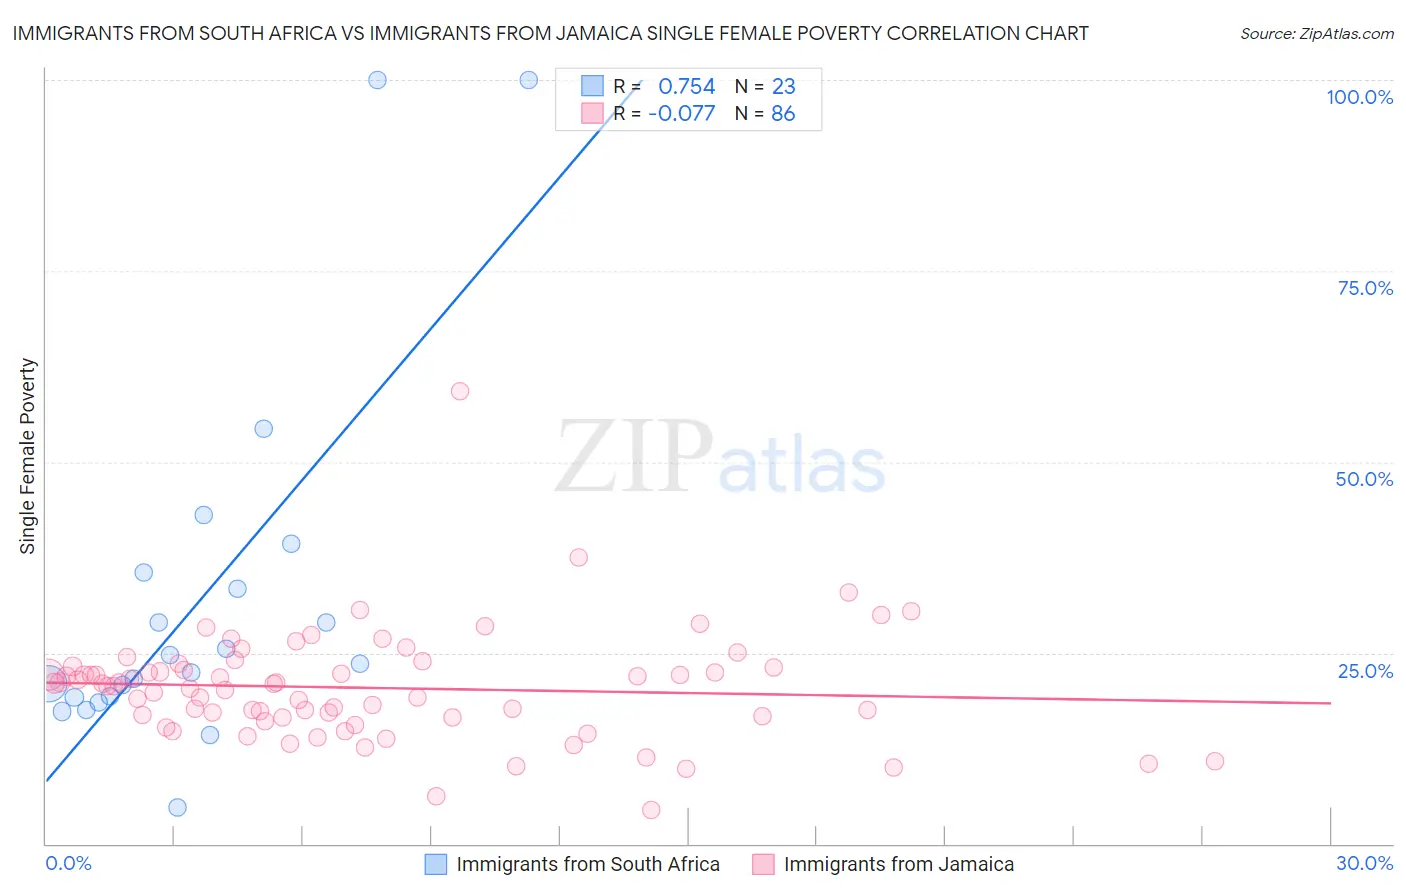 Immigrants from South Africa vs Immigrants from Jamaica Single Female Poverty